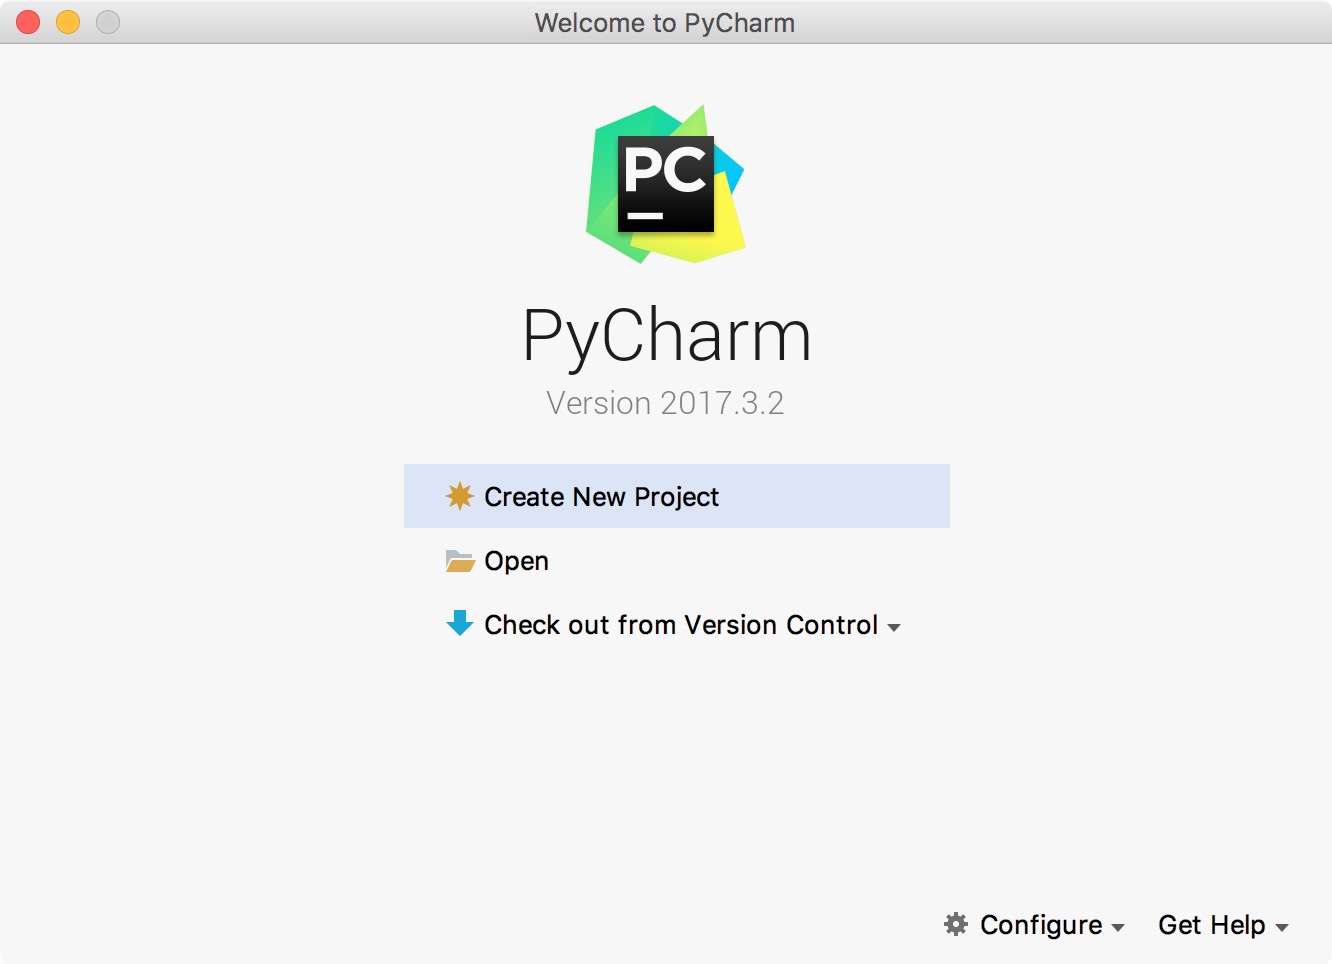 instal the new for windows PyCharm